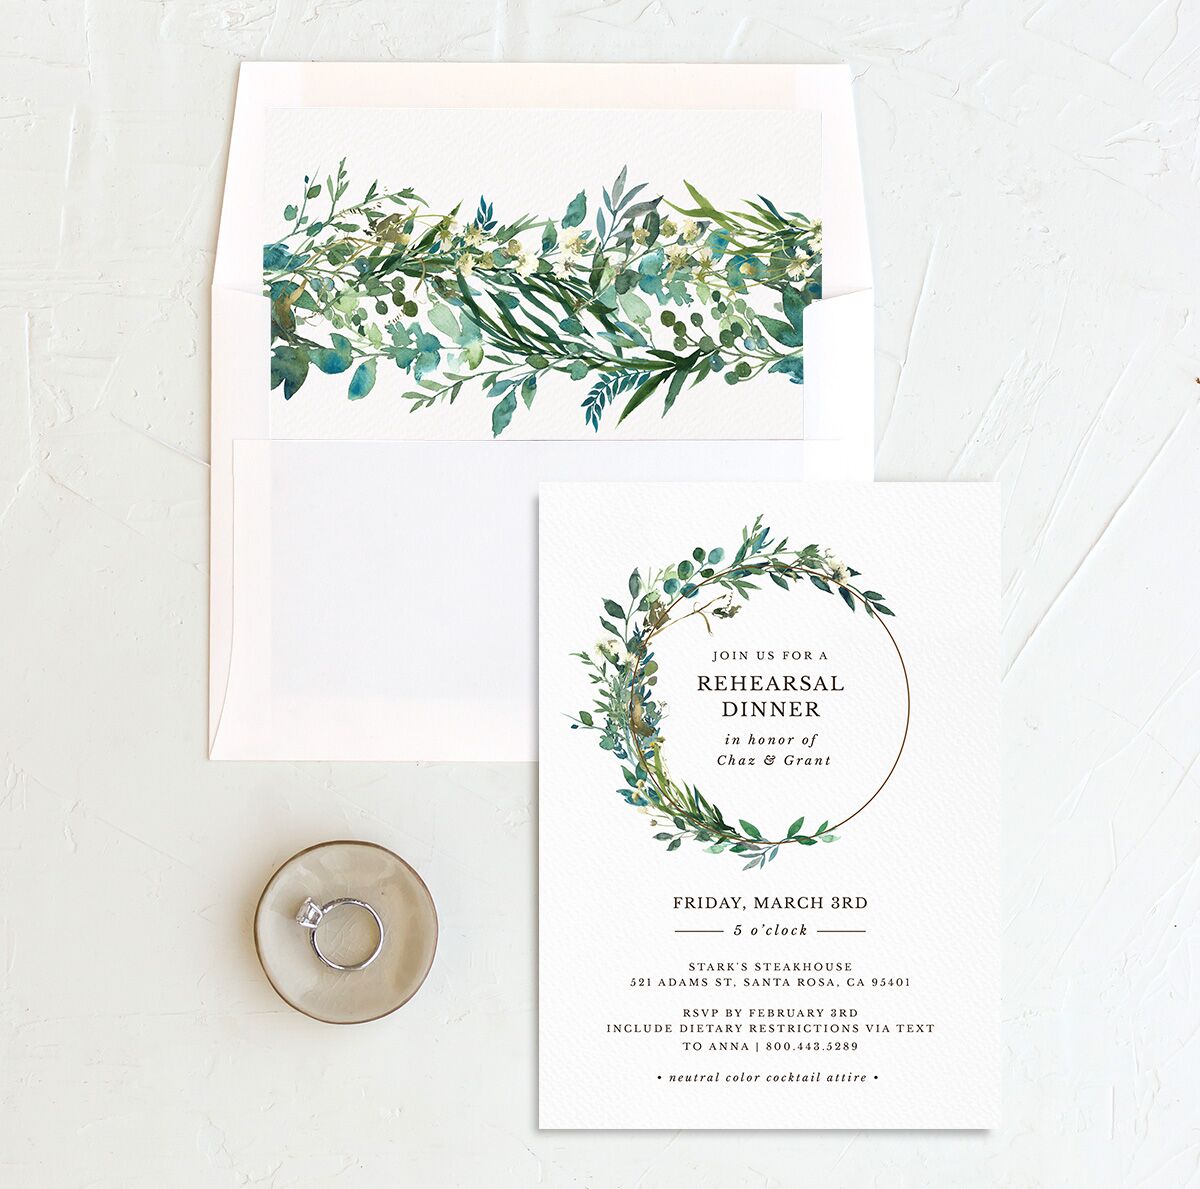 Floral Circles Rehearsal Dinner Invitations [object Object] in White